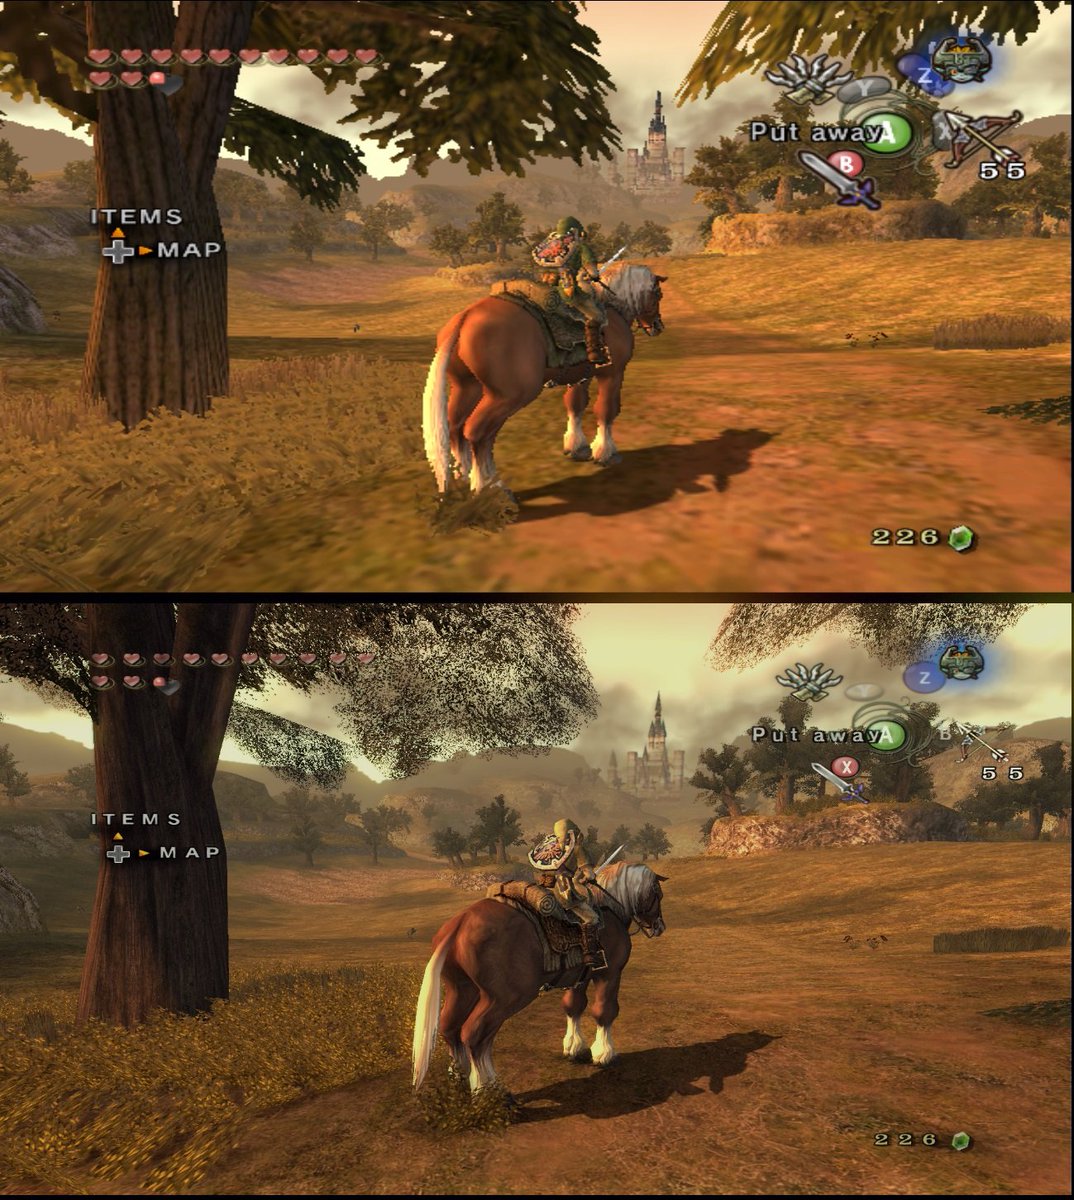 The fun part about never playing these iconic games like Twilight Princess is that there's an HD mod for like EVERY game now, and holy shit